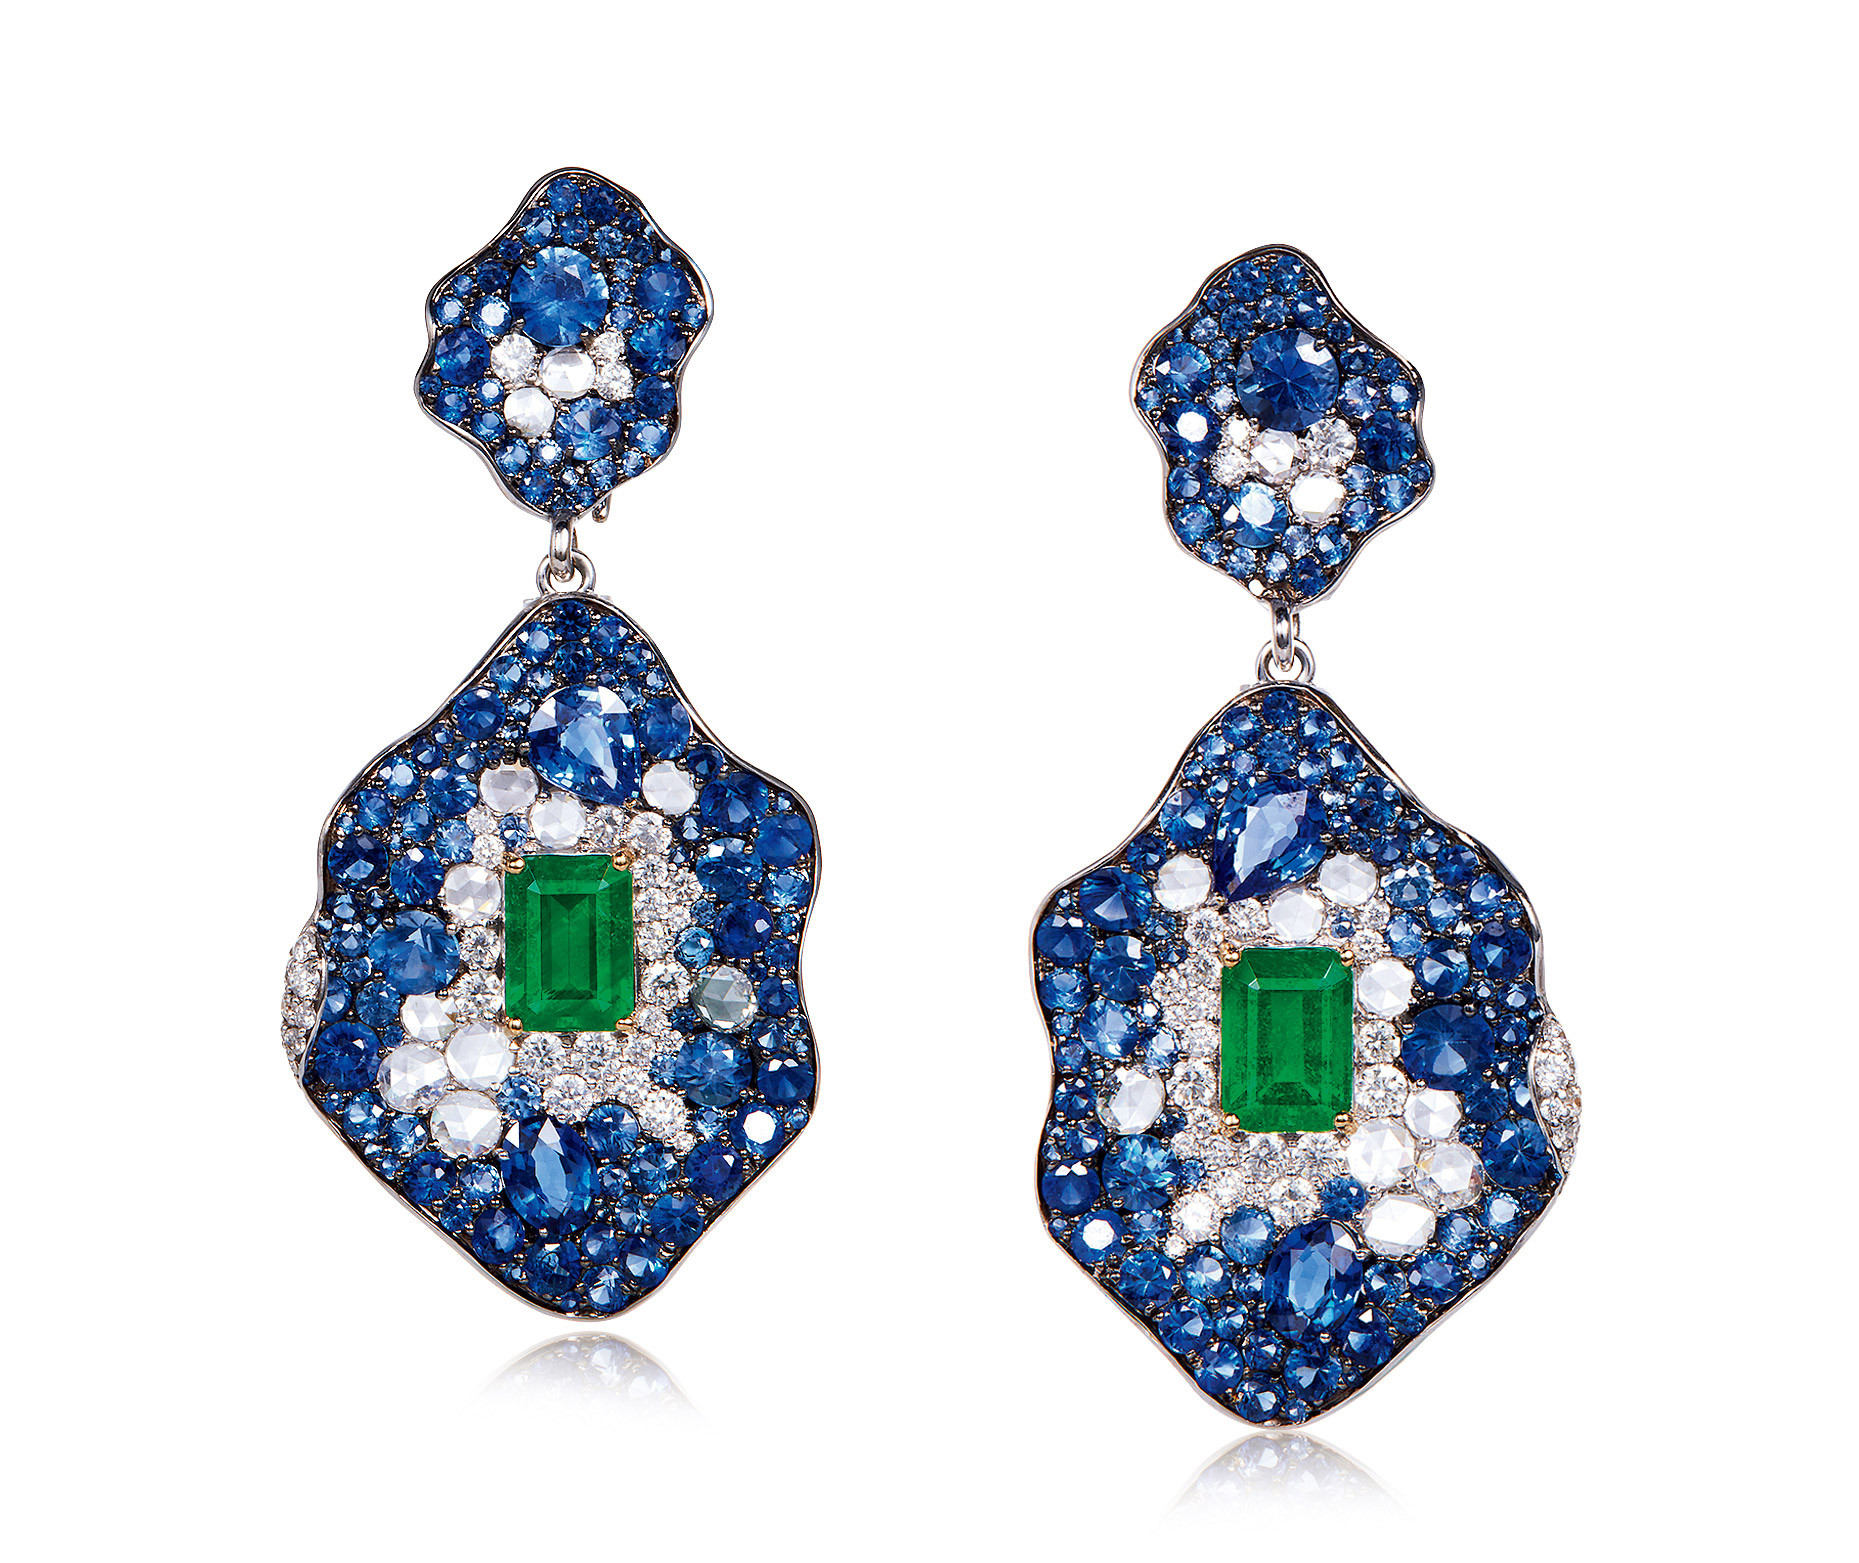 A PAIR OF EMERALD, SAPPHIRE AND DIAMOND EAR PENDANTS, DESIGNED BY DAI LIN